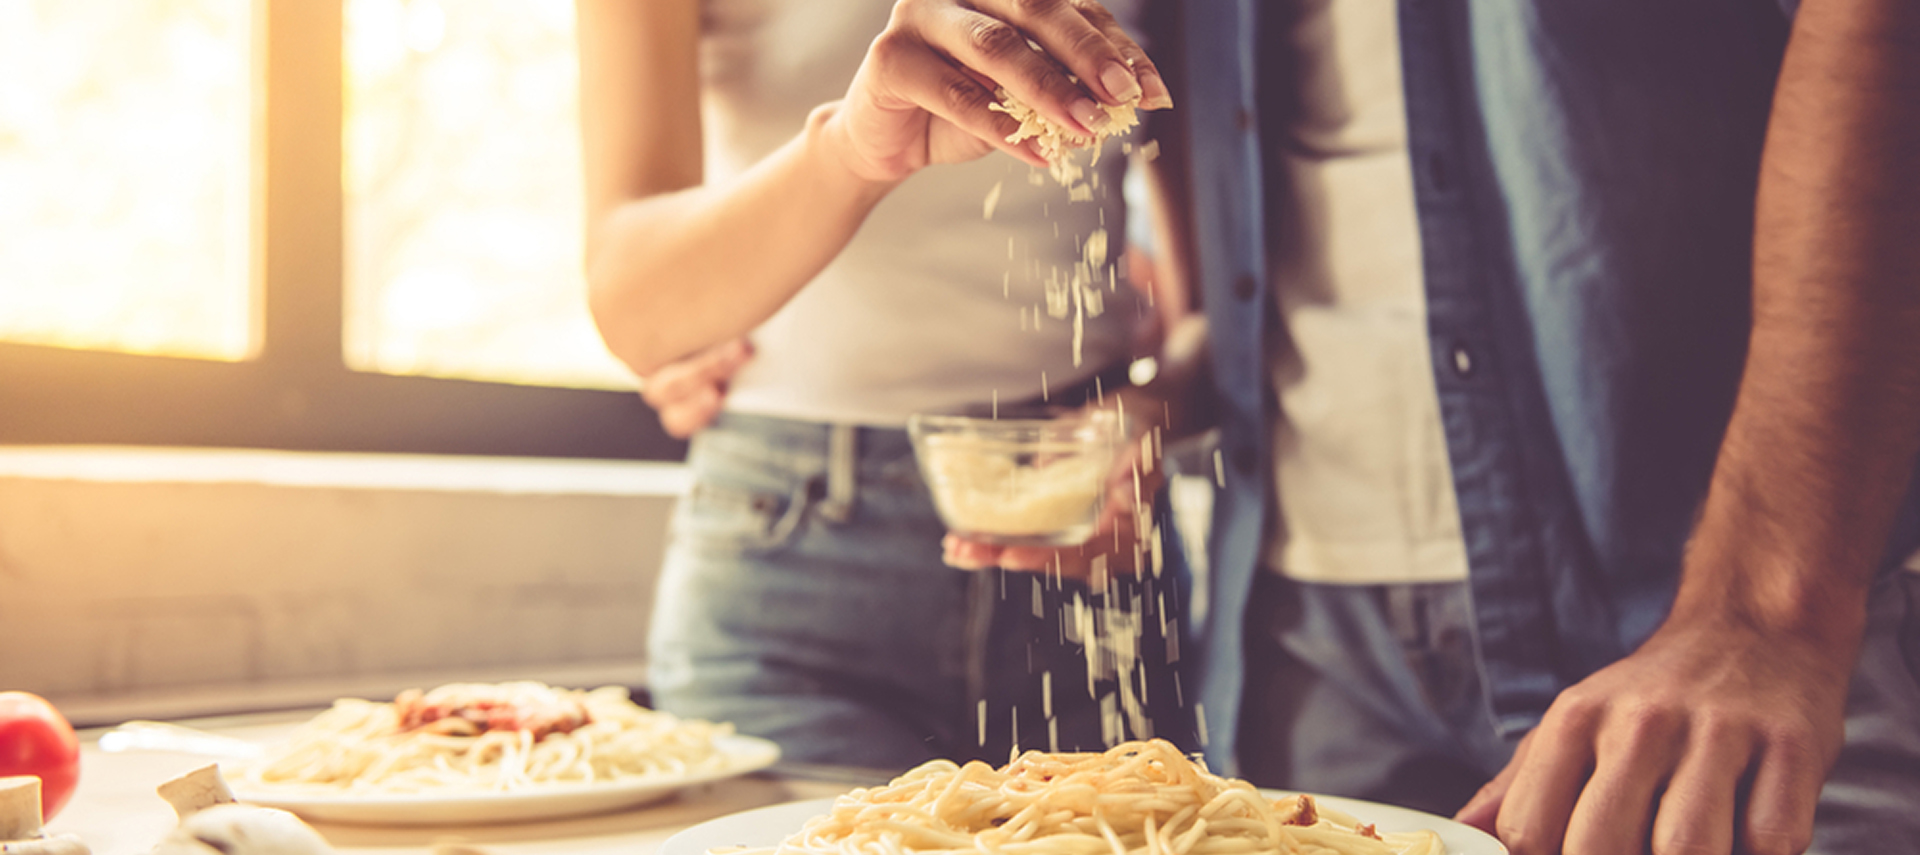 Cropped image of beautiful young couple eating spaghetti in kitchen at home. Woman is adding grated cheese